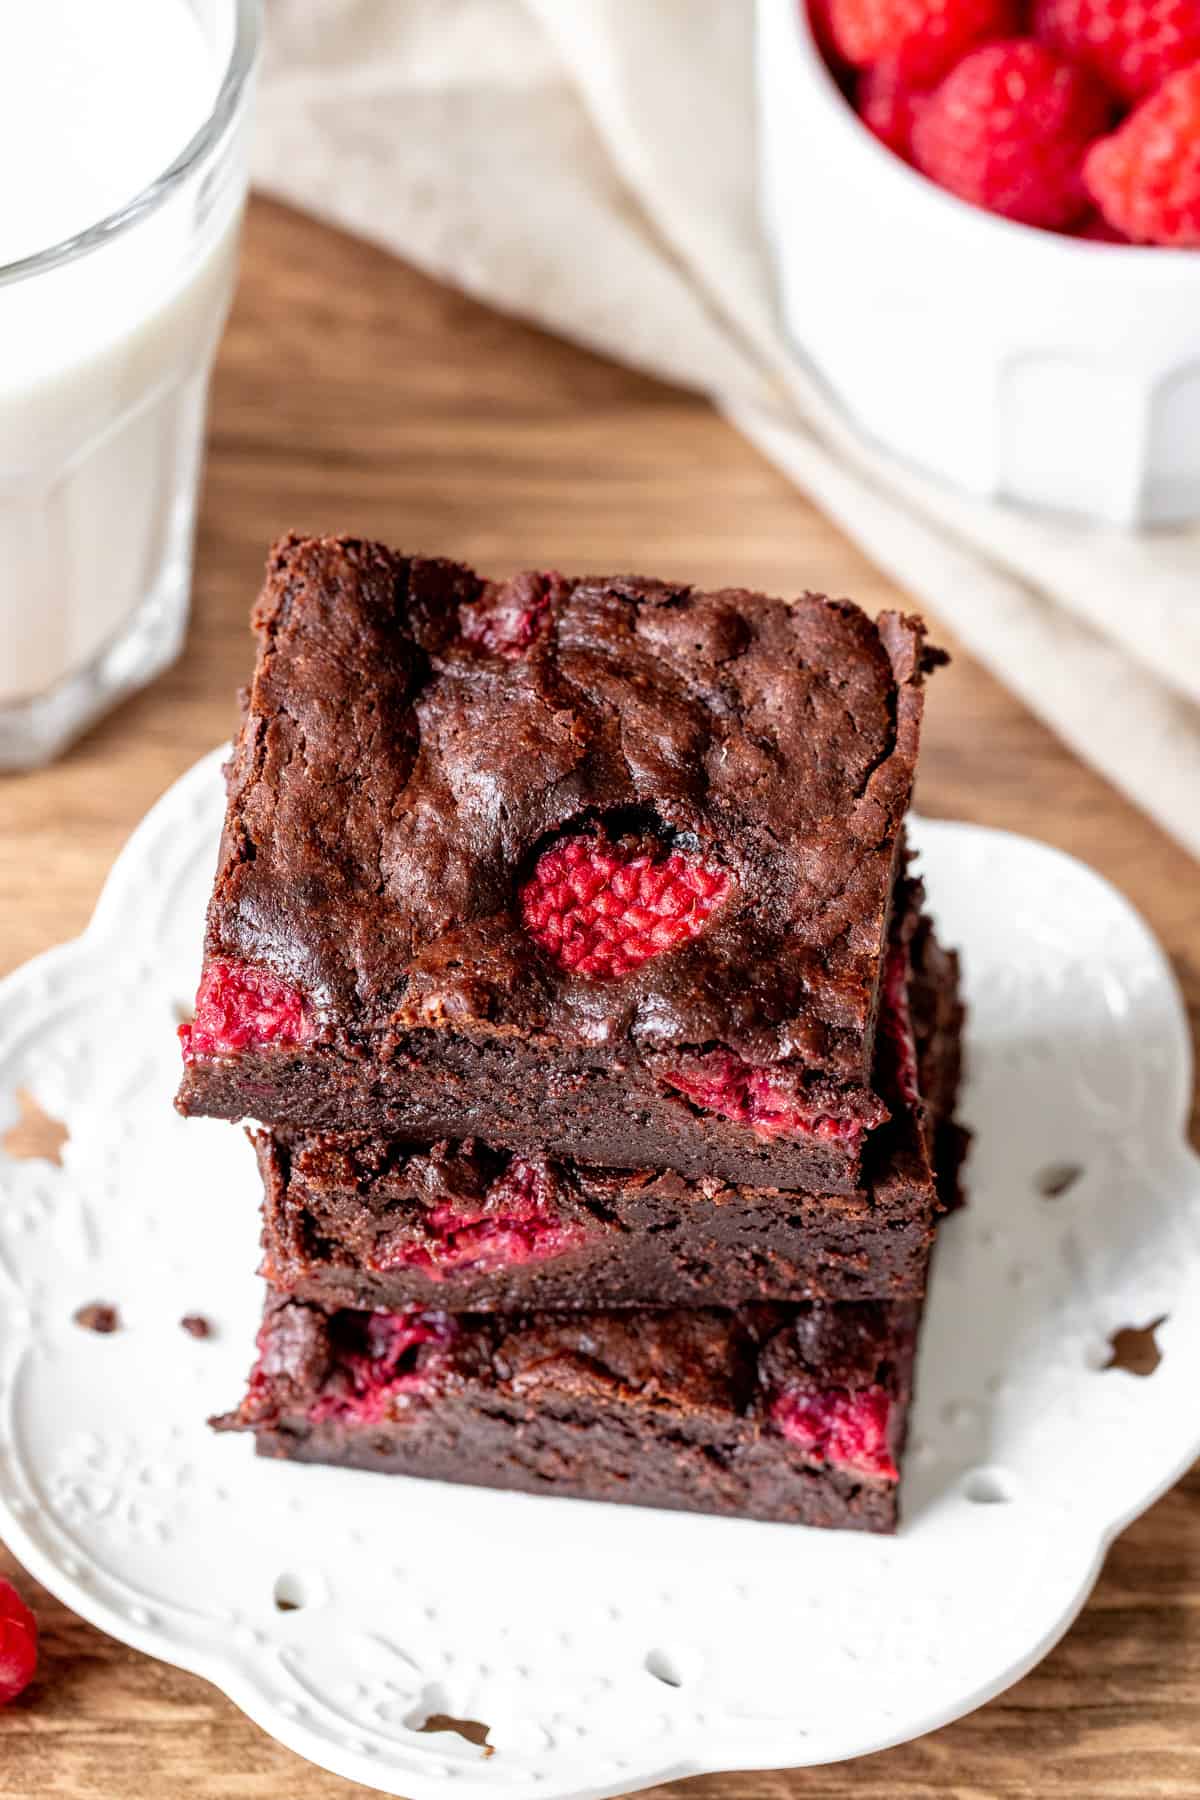 Three brownies studded with raspberries, stacked on top of eachother